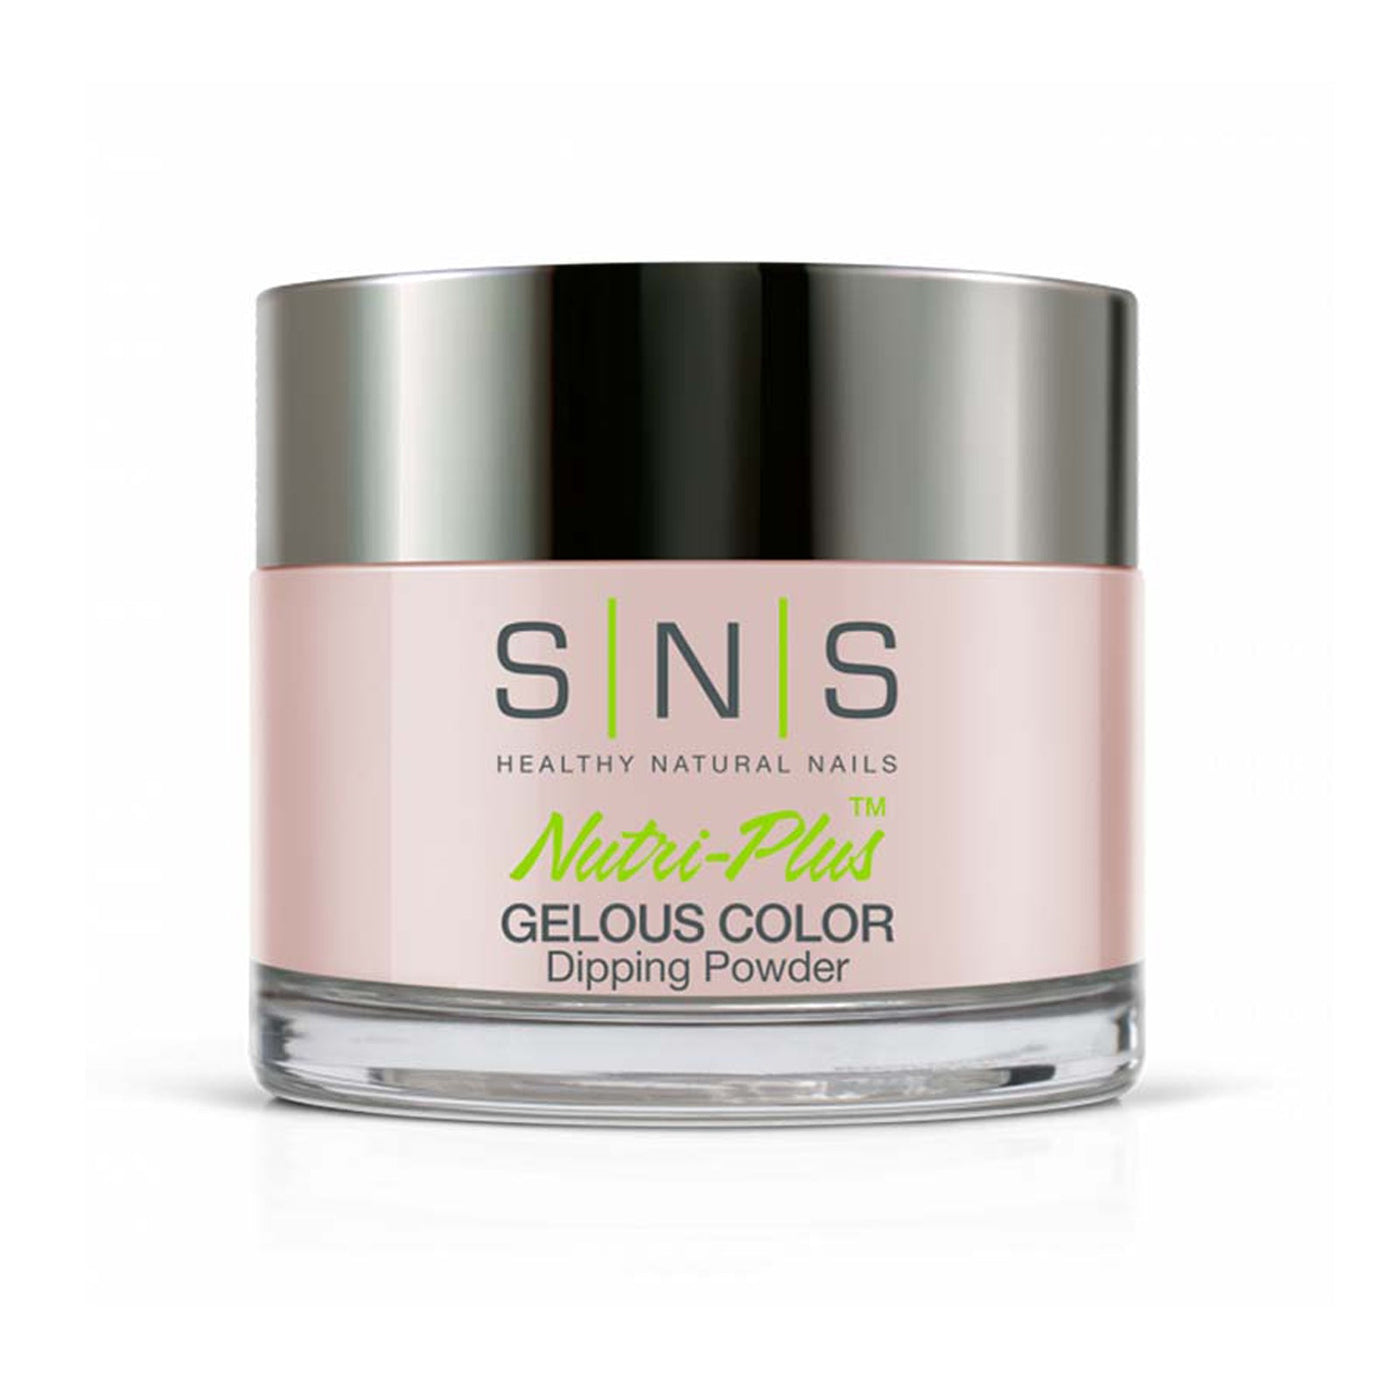 SNS Gelous Color Dipping Powder SY06 Get Toasted (43g) packaging